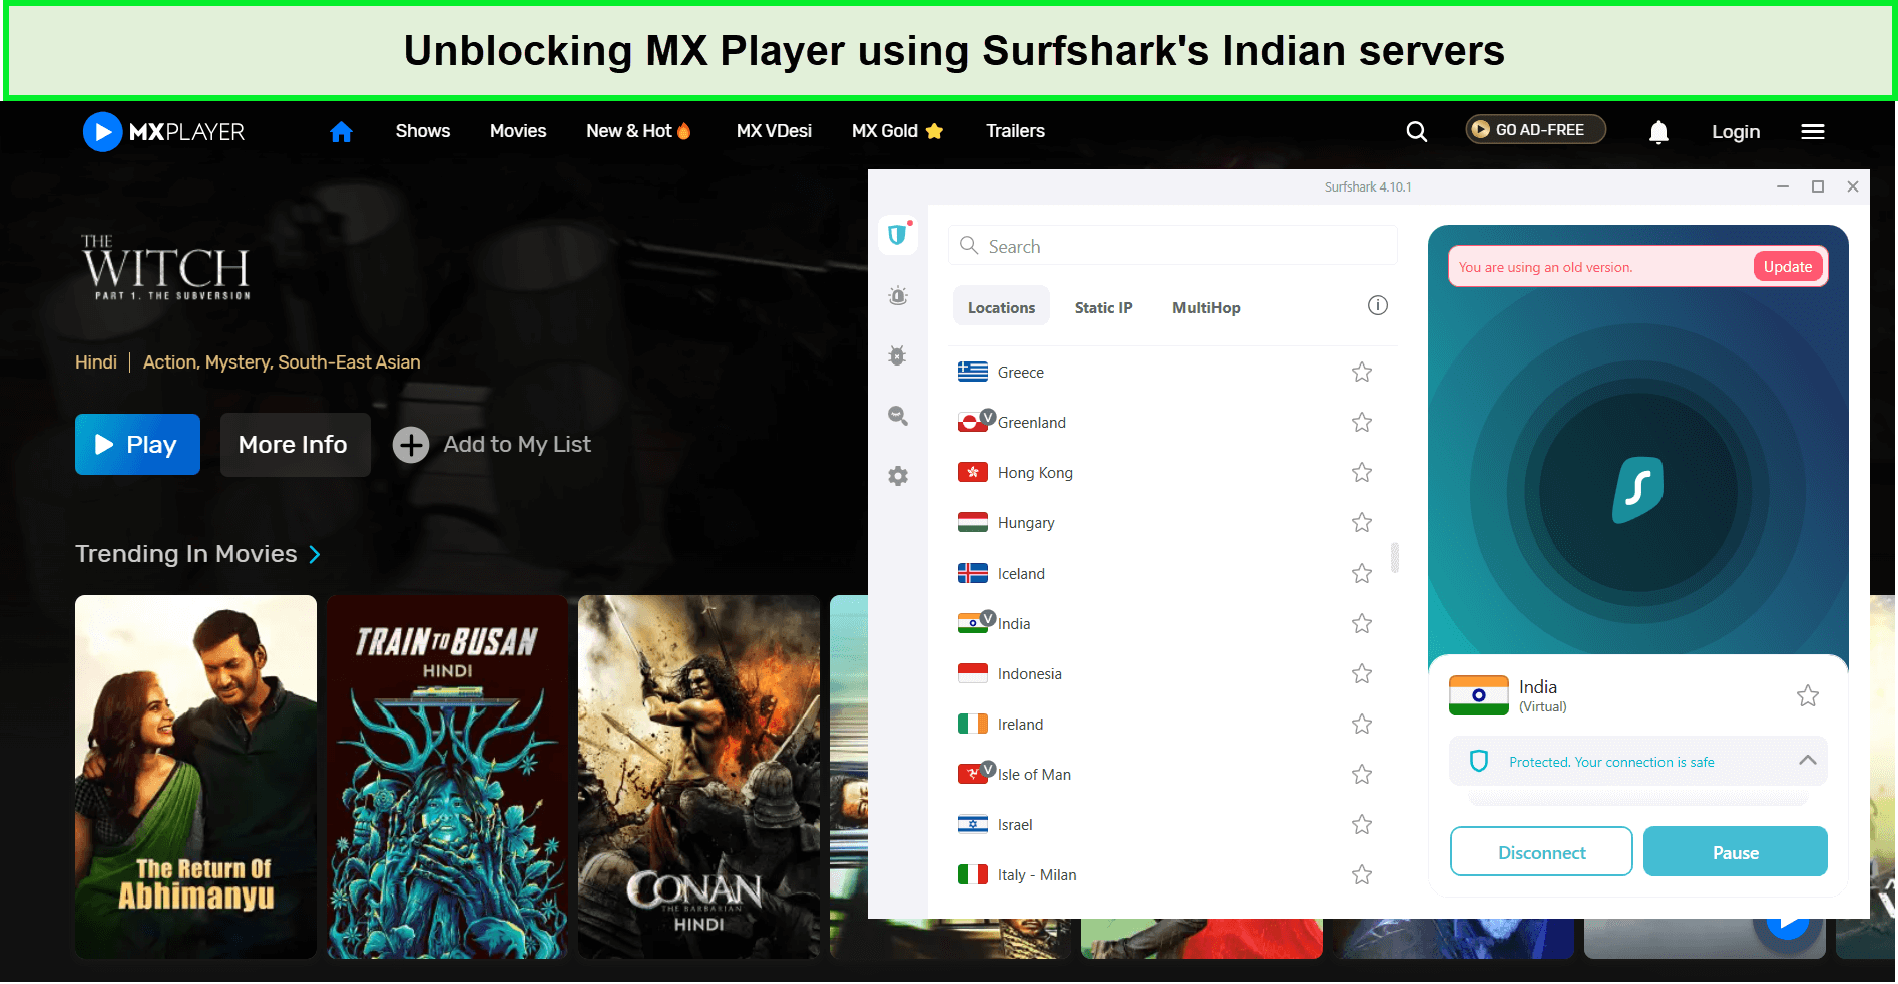 mx-player-in-Canada-unblocked-surfshark